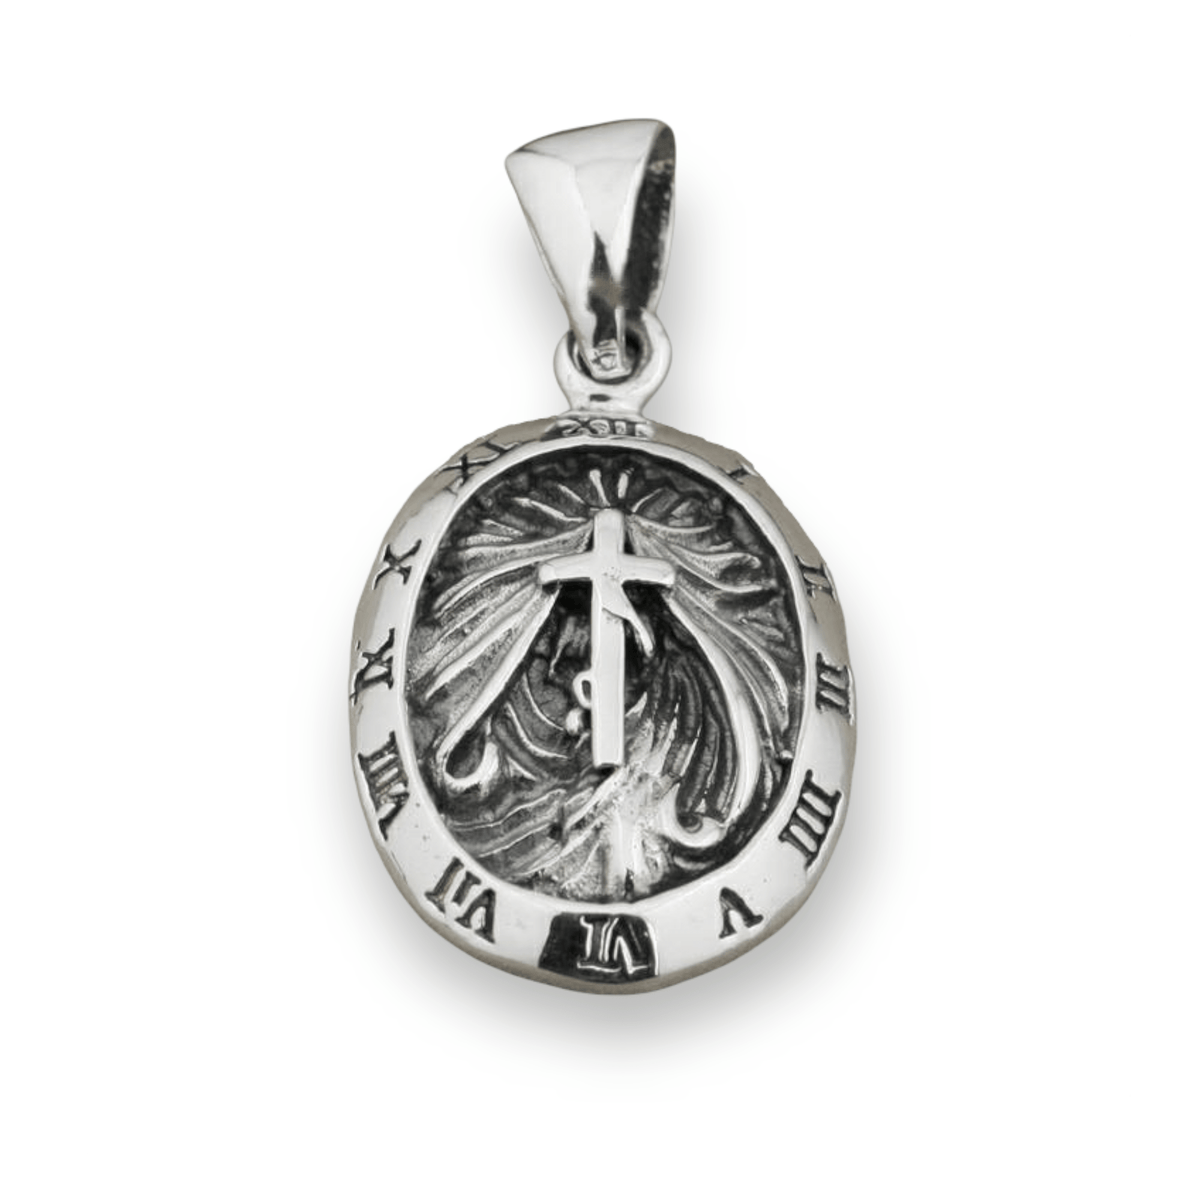 In God's Time Pendant Necklace - Cornerstone Jewellery Pendant Only Necklace Christian Catholic Religous fine Jewelry